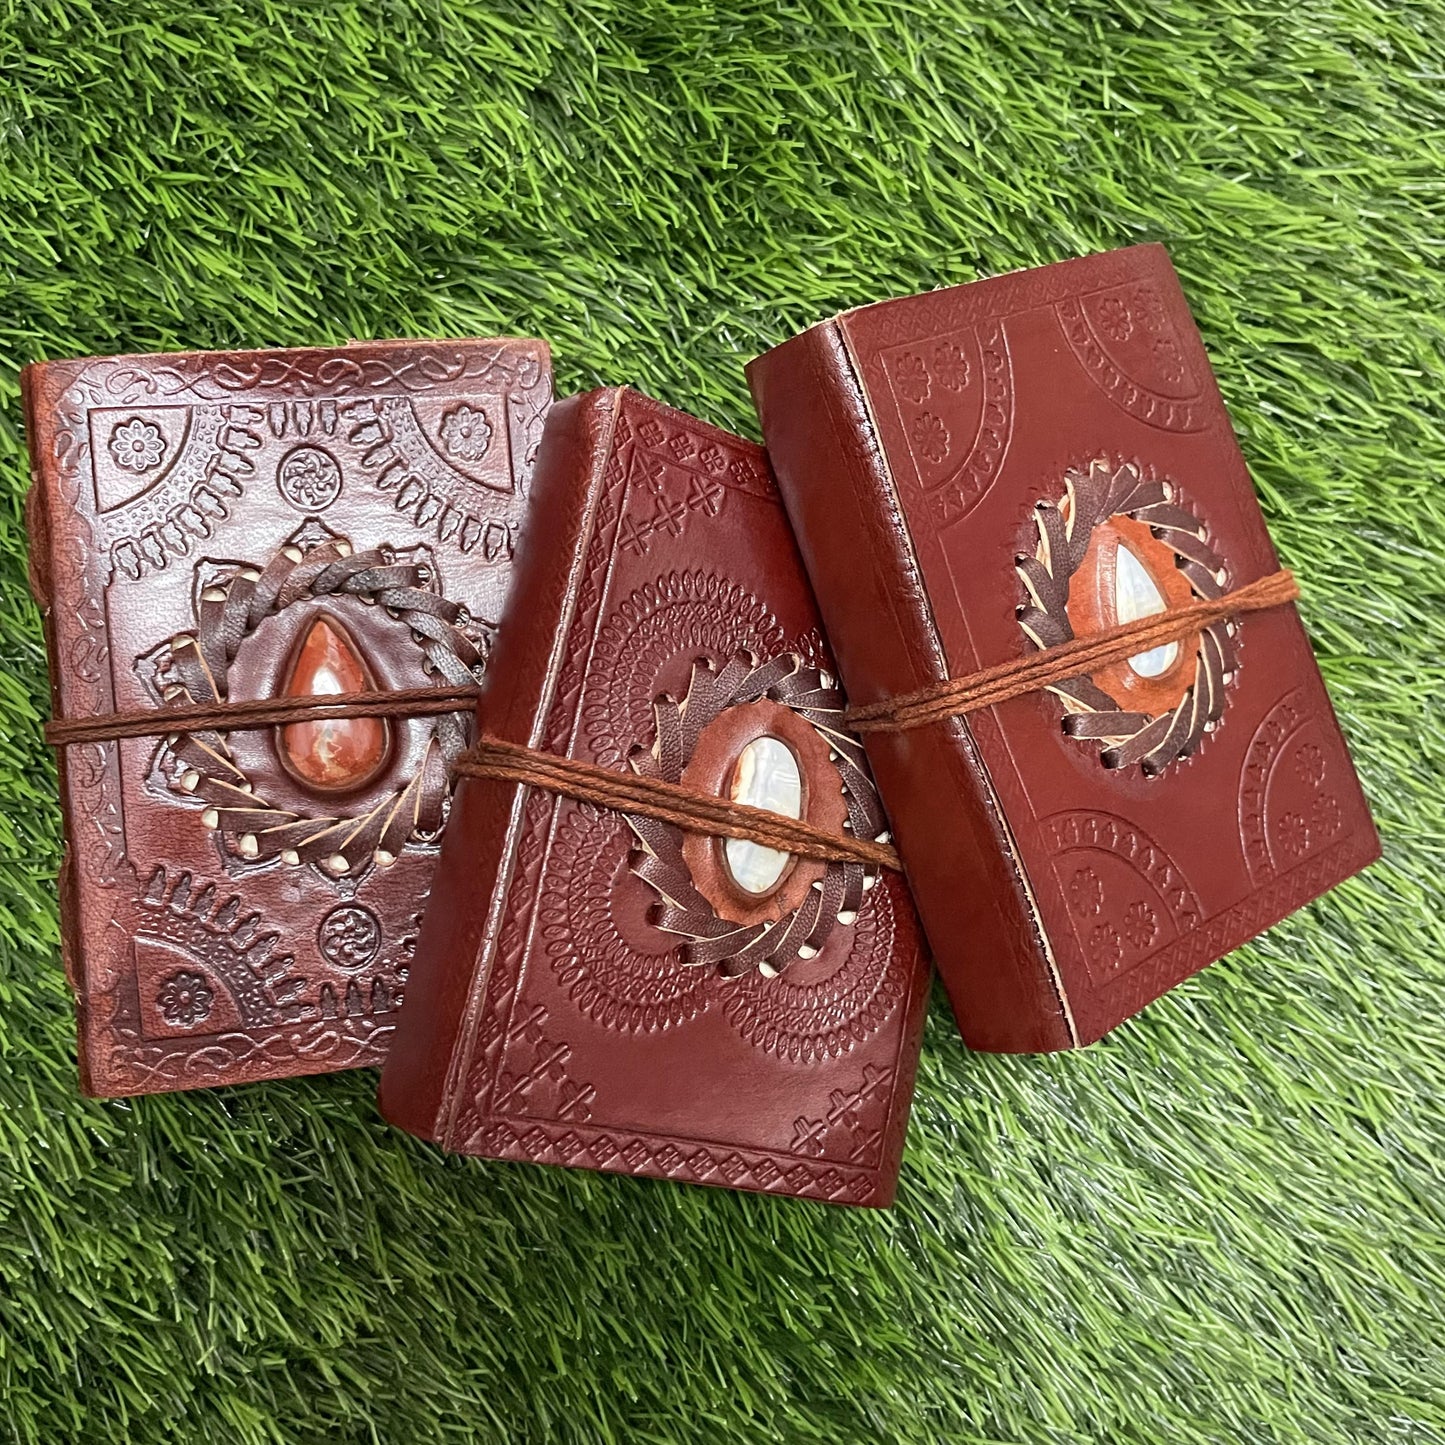 Embellished Leather Diary in a Compact 5x3.5 Inch Size" With Natural Gemstone